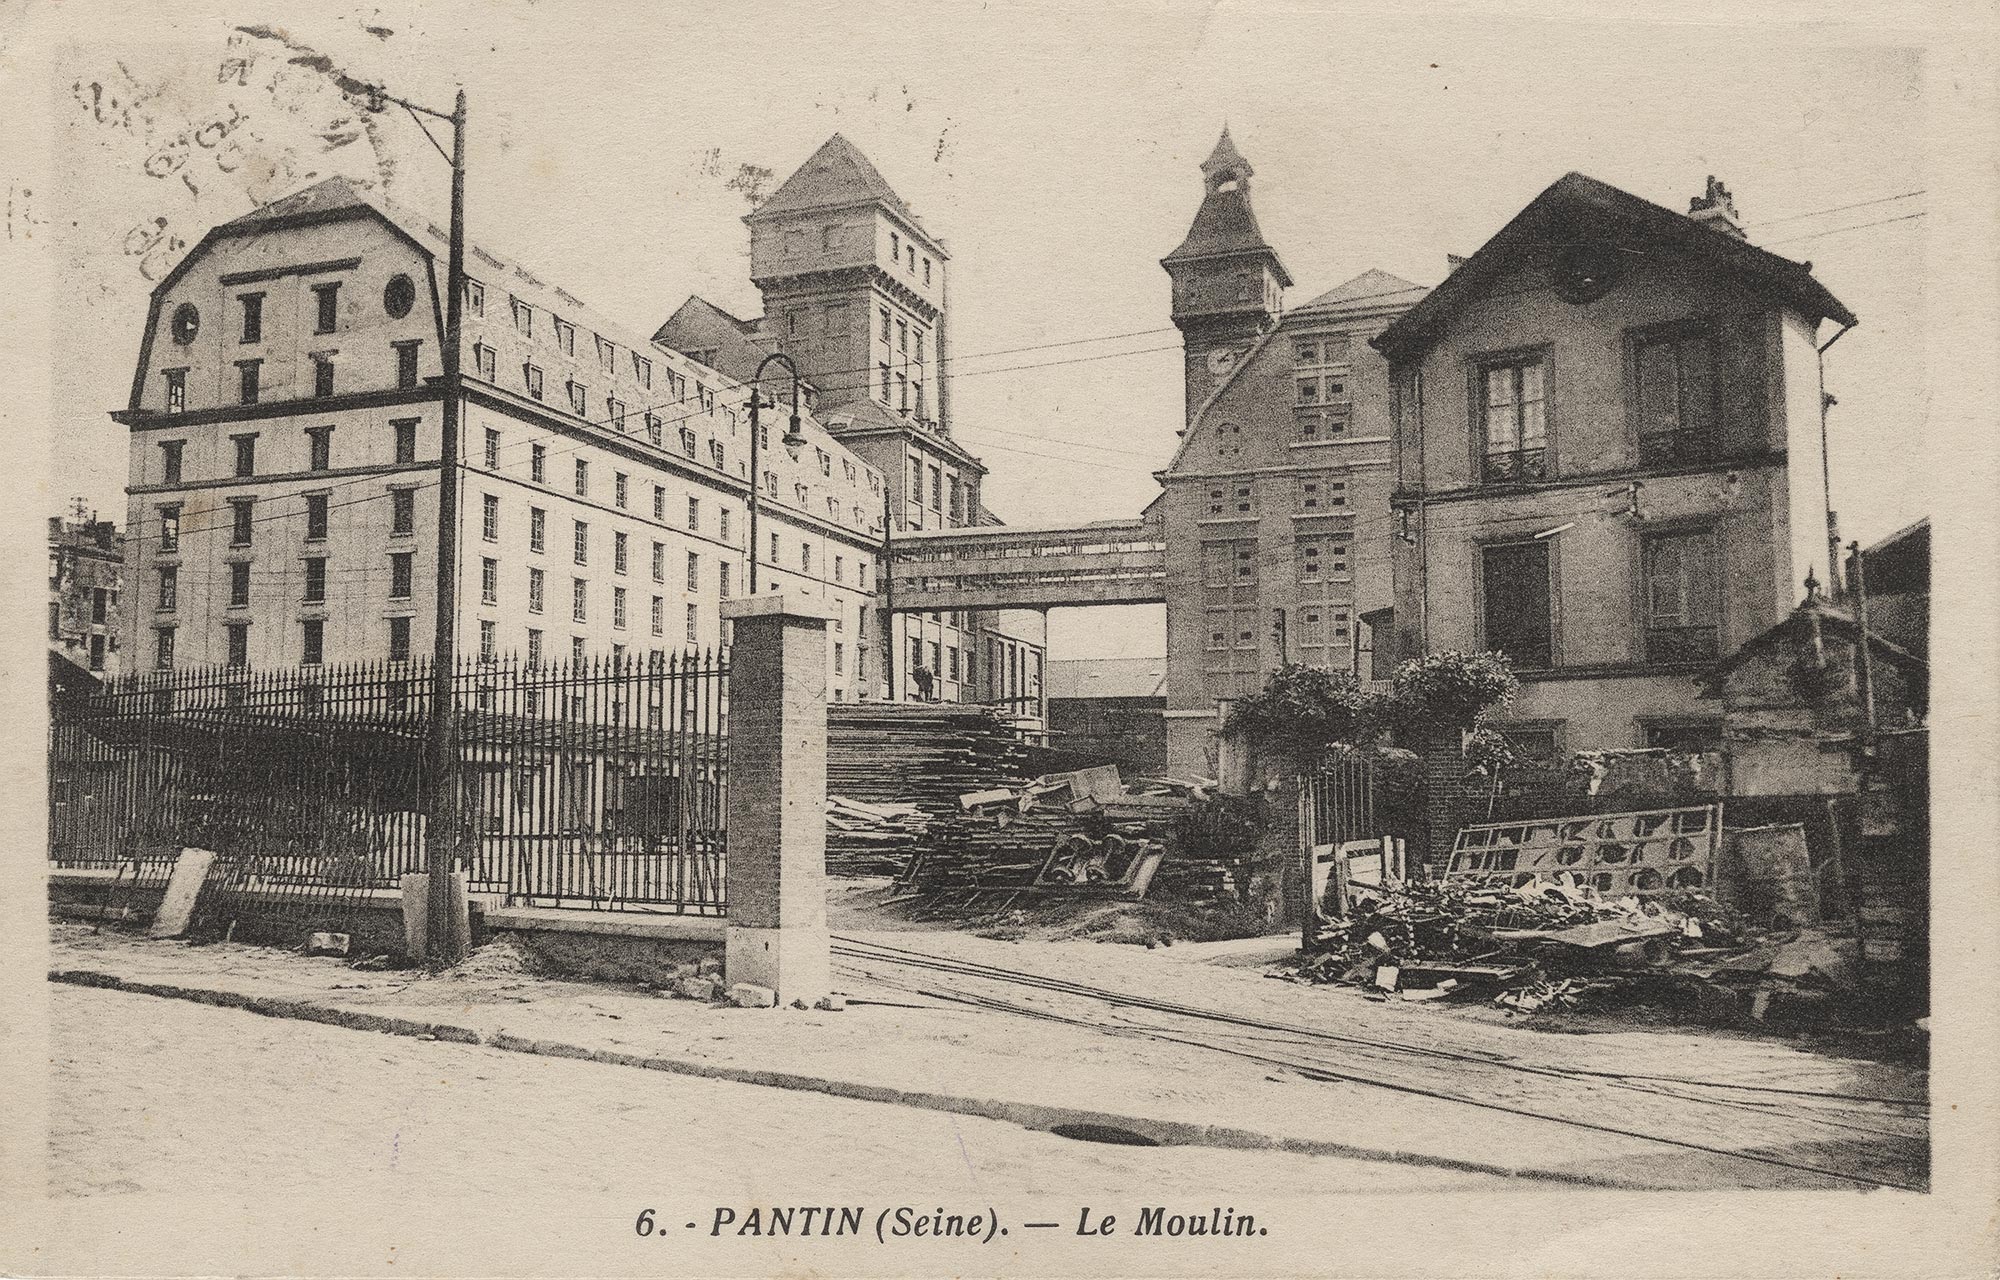 Les Grands Moulins de Pantin. Postcard in black and white. Pantin Municipal Archive with reference 2FI/808. No date.